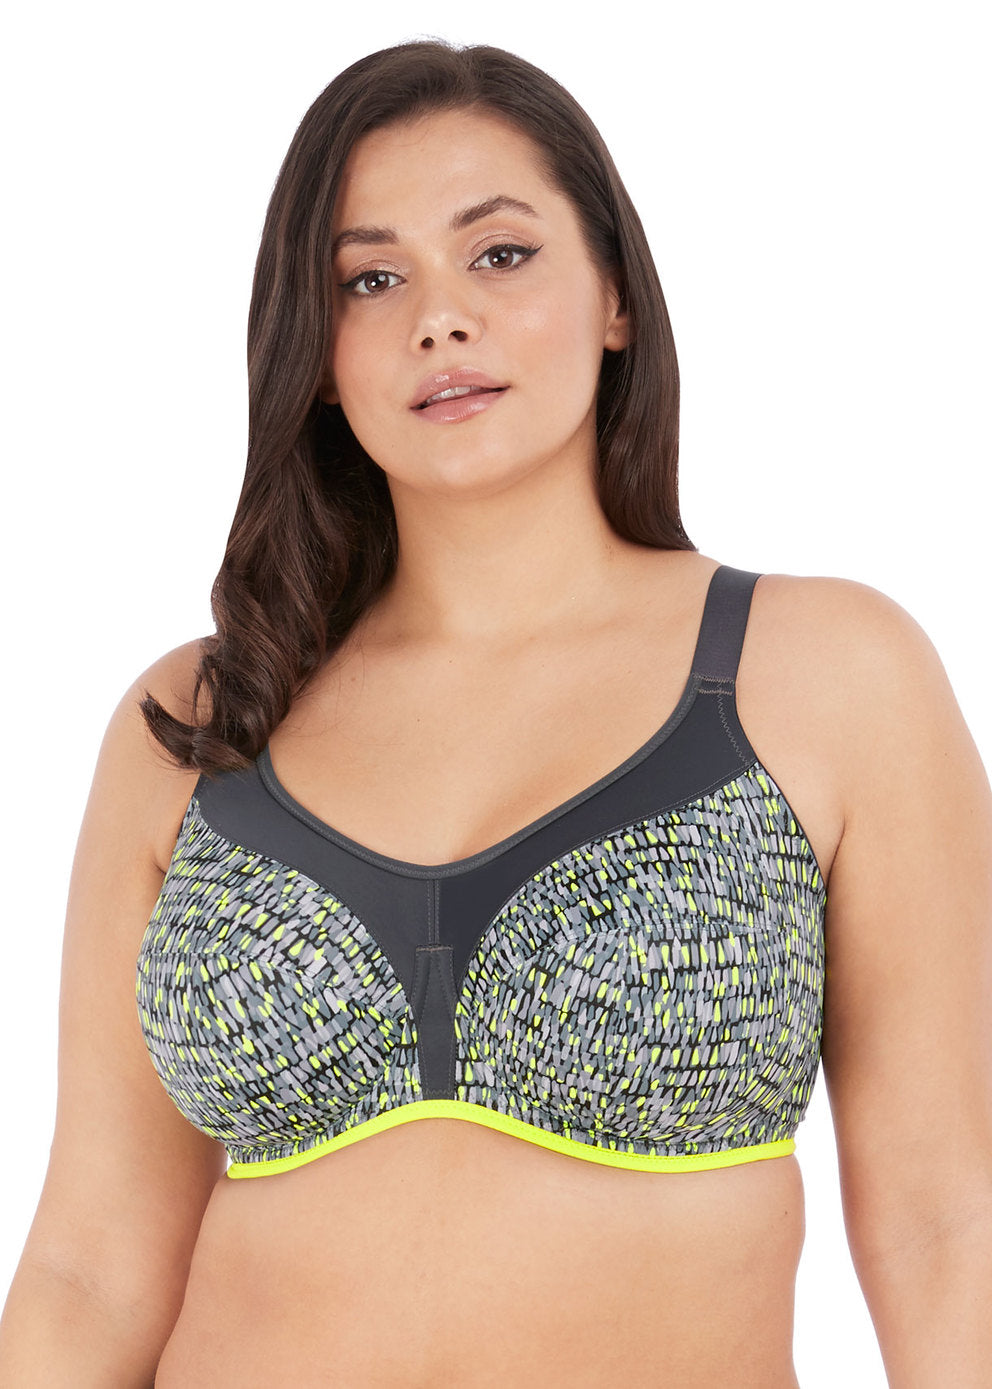 Energize Underwire Sports Bra with J Hook (8042)